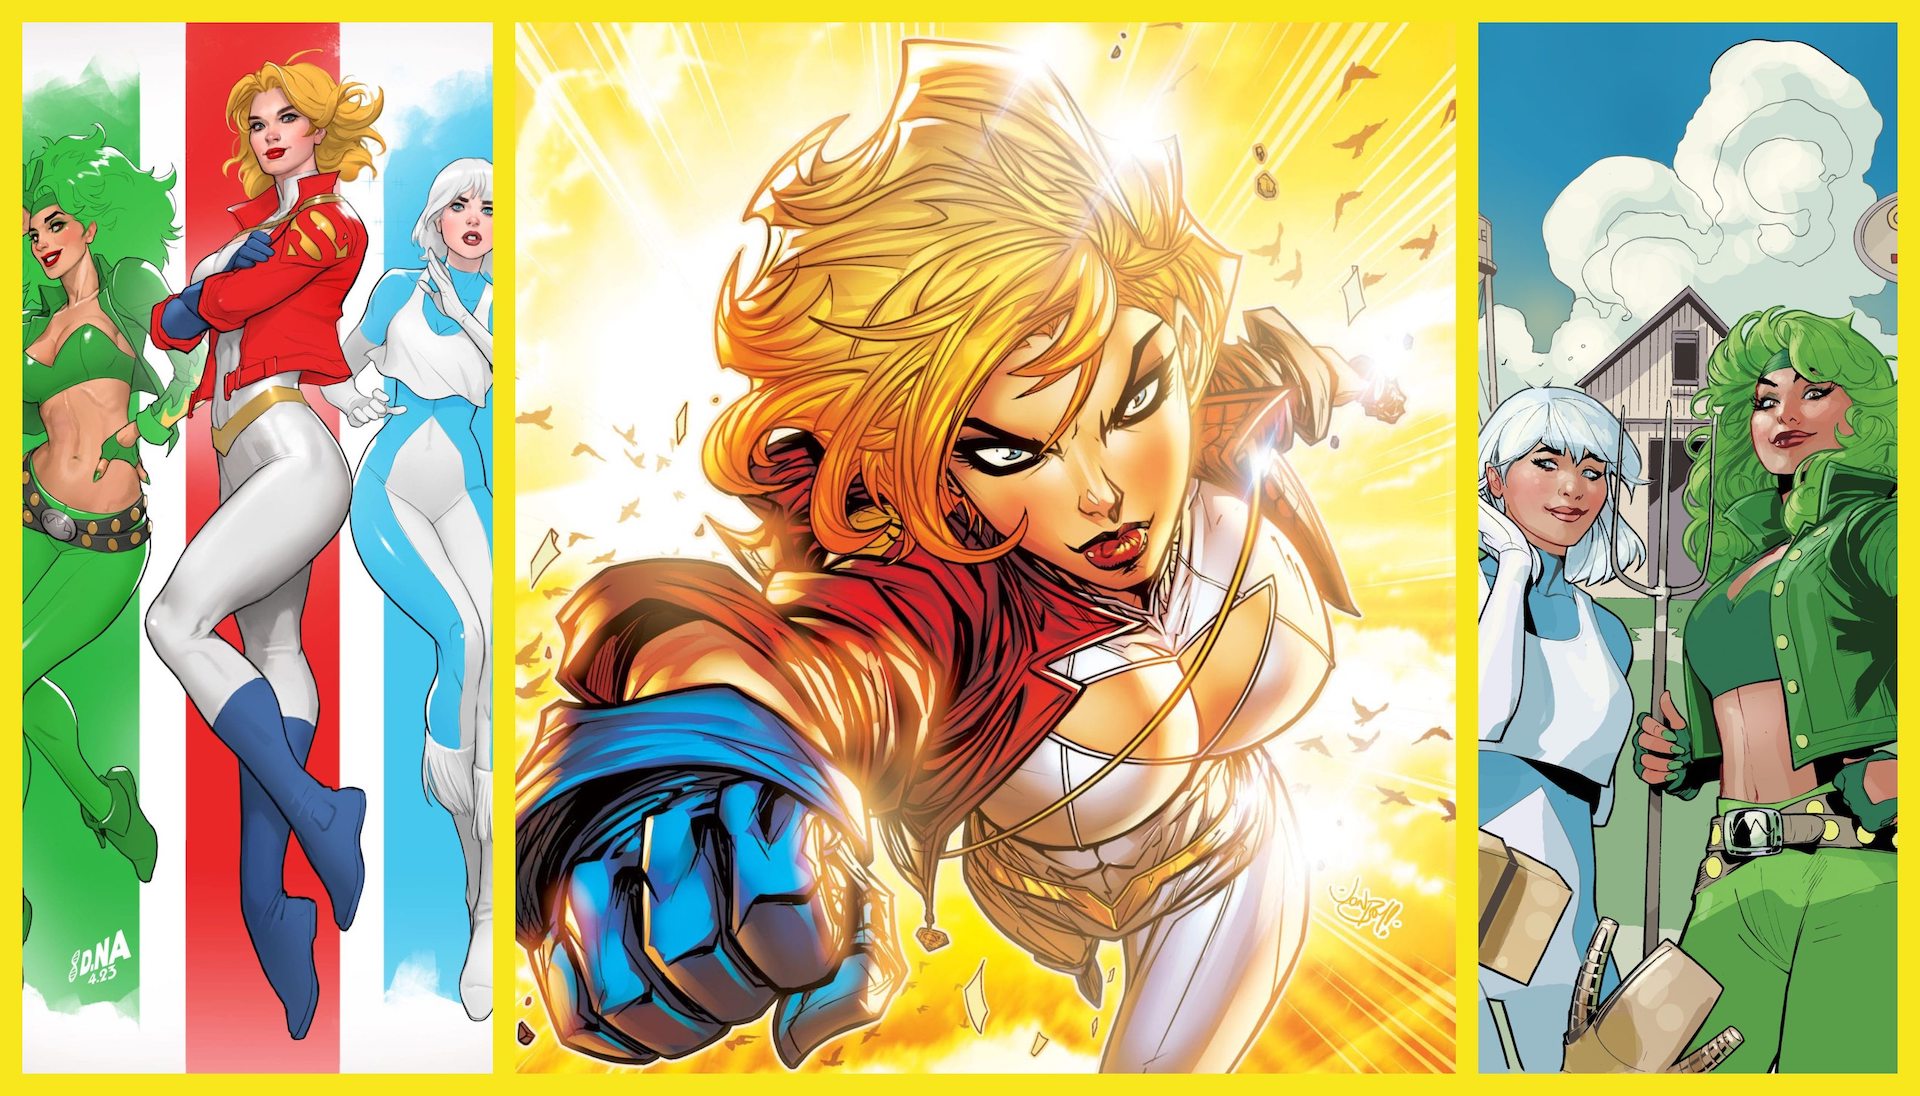 Dawn of DC adds new series 'Power Girl' and 'Fire & Ice: Welcome to Smallville'